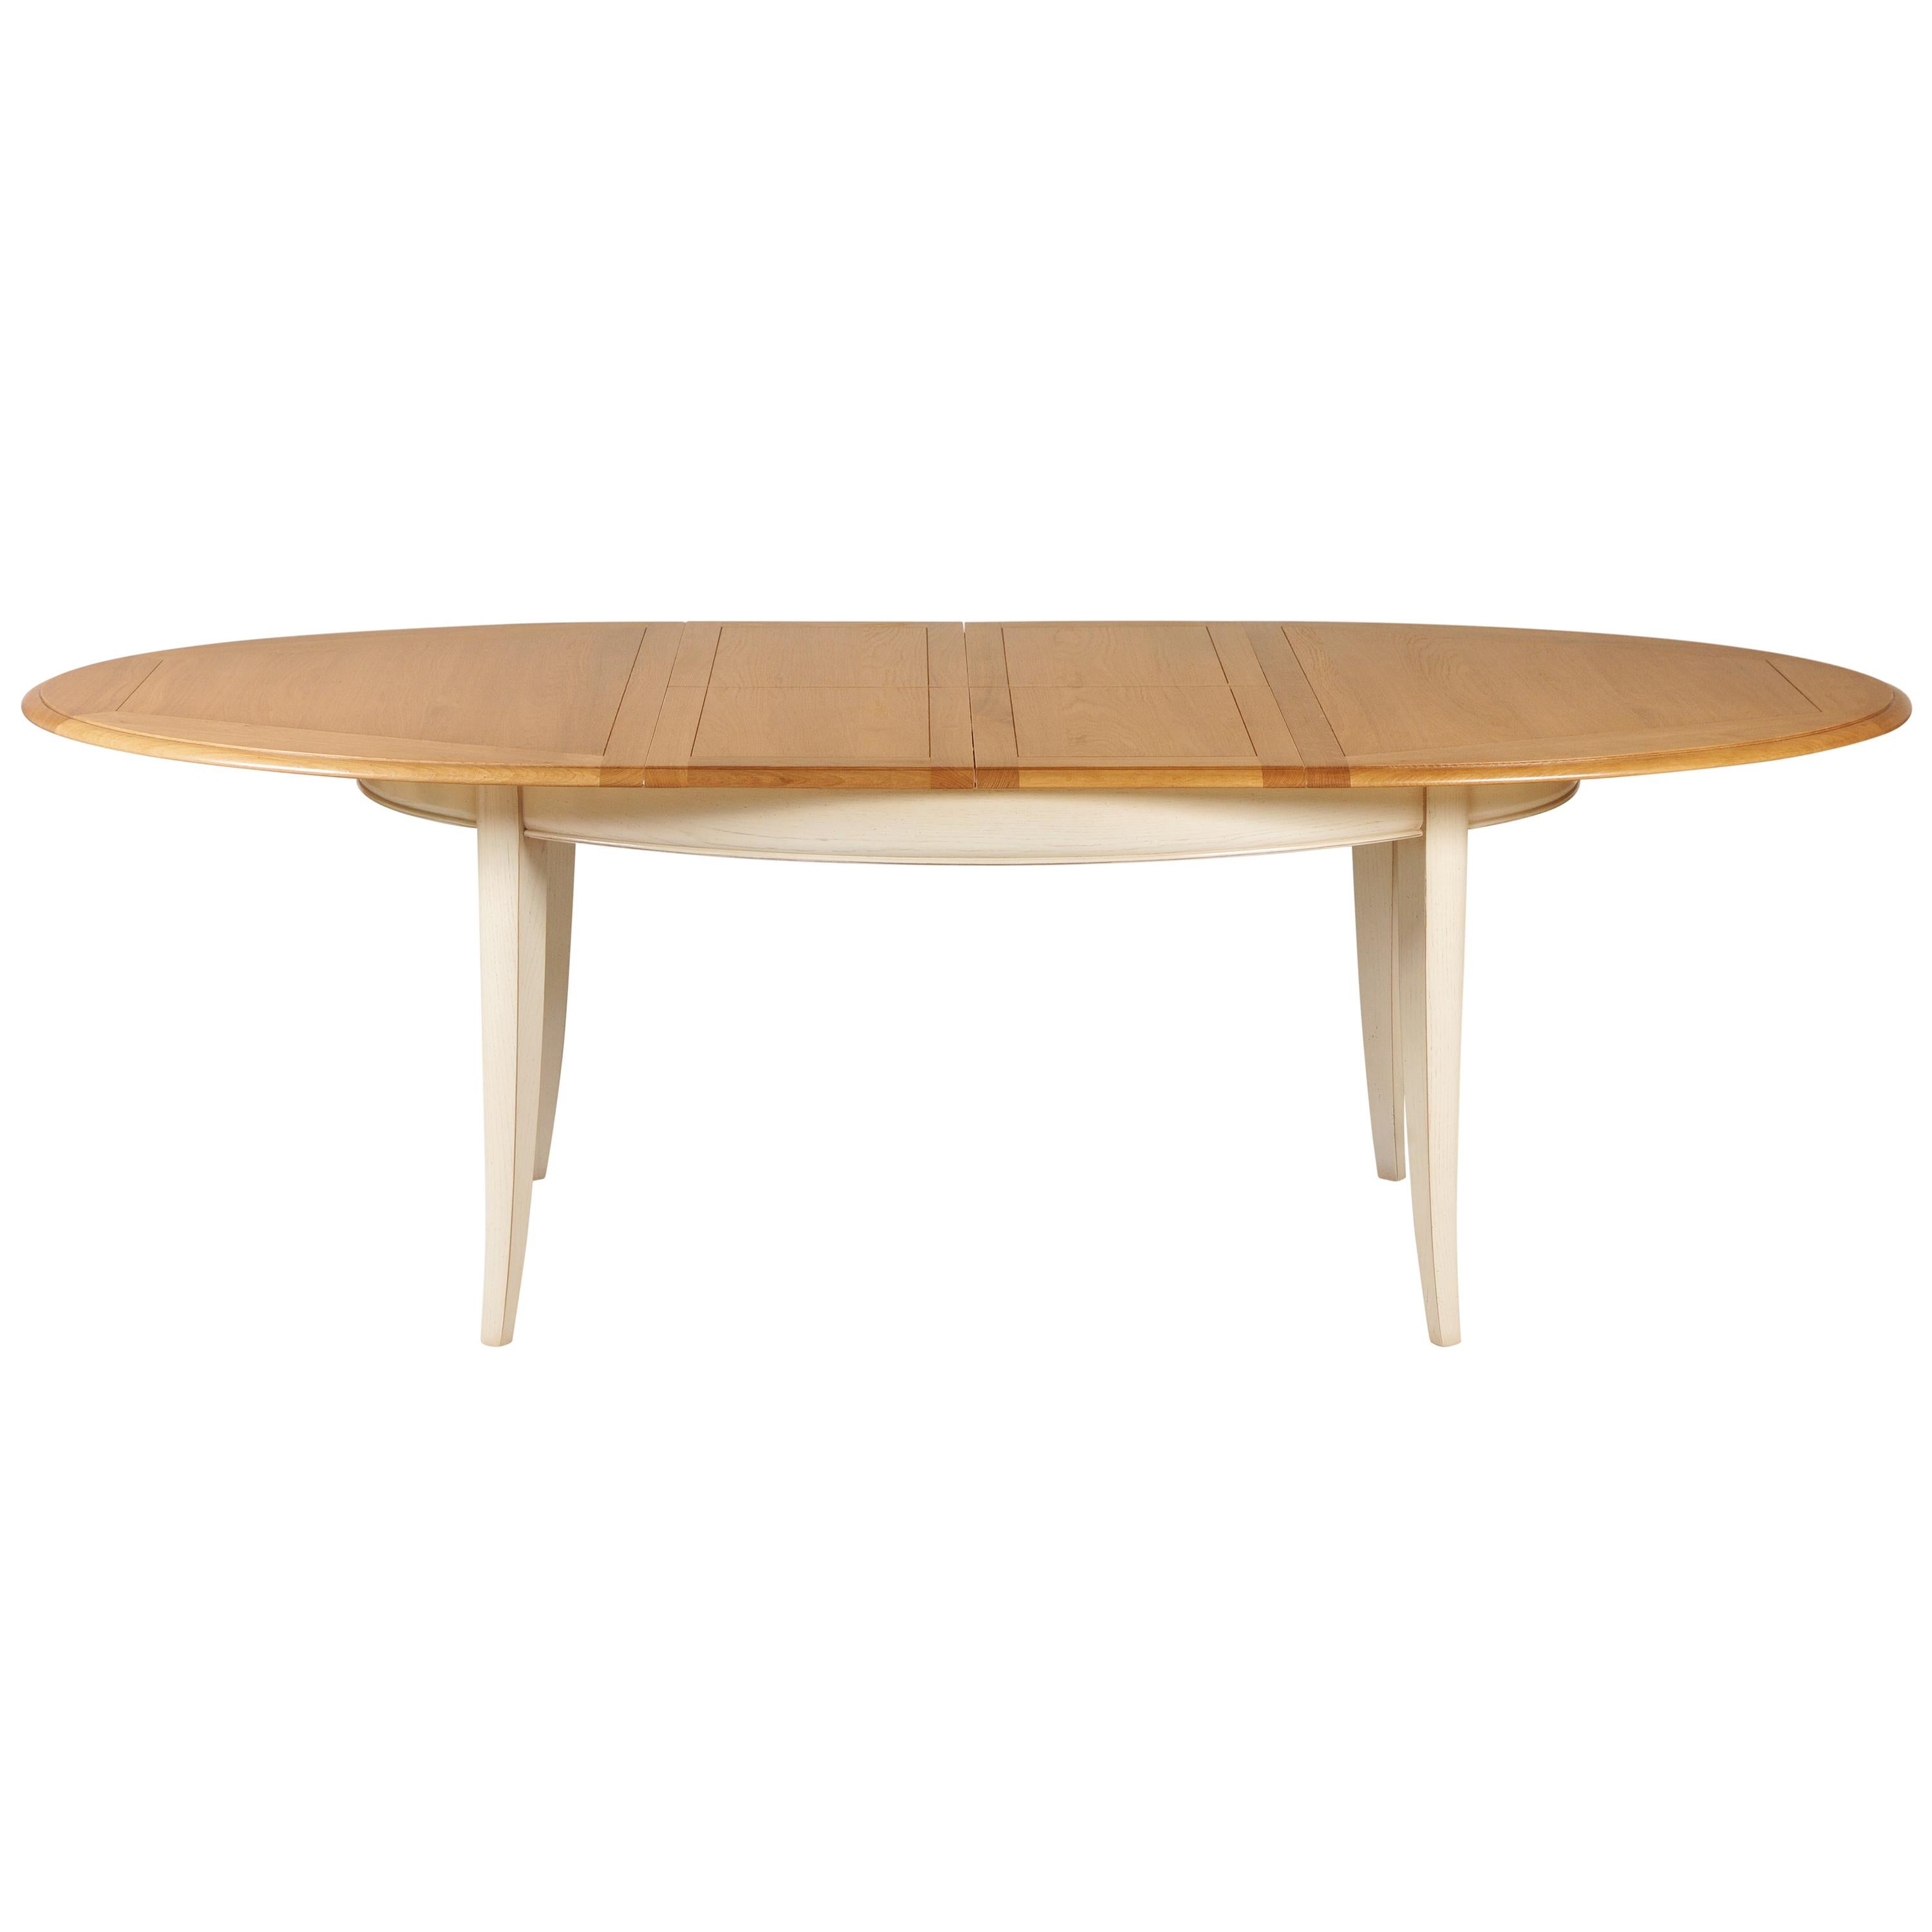 This oval dining table is in a French Countryside style also called 